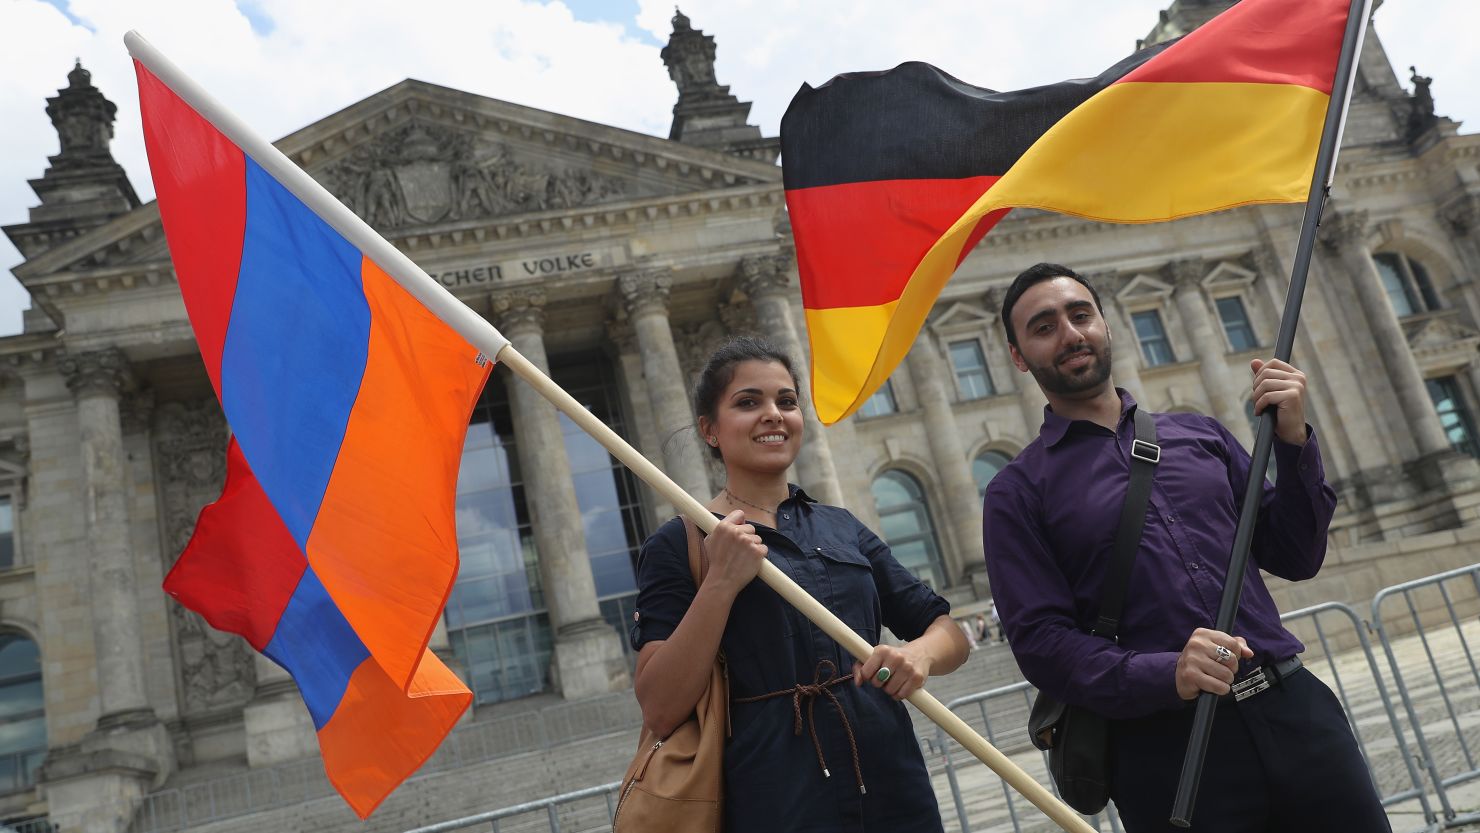 Activists hold up Armenian and German flags outside the Reichstag after a resolution recognizing the 1915 Armenian genocide.